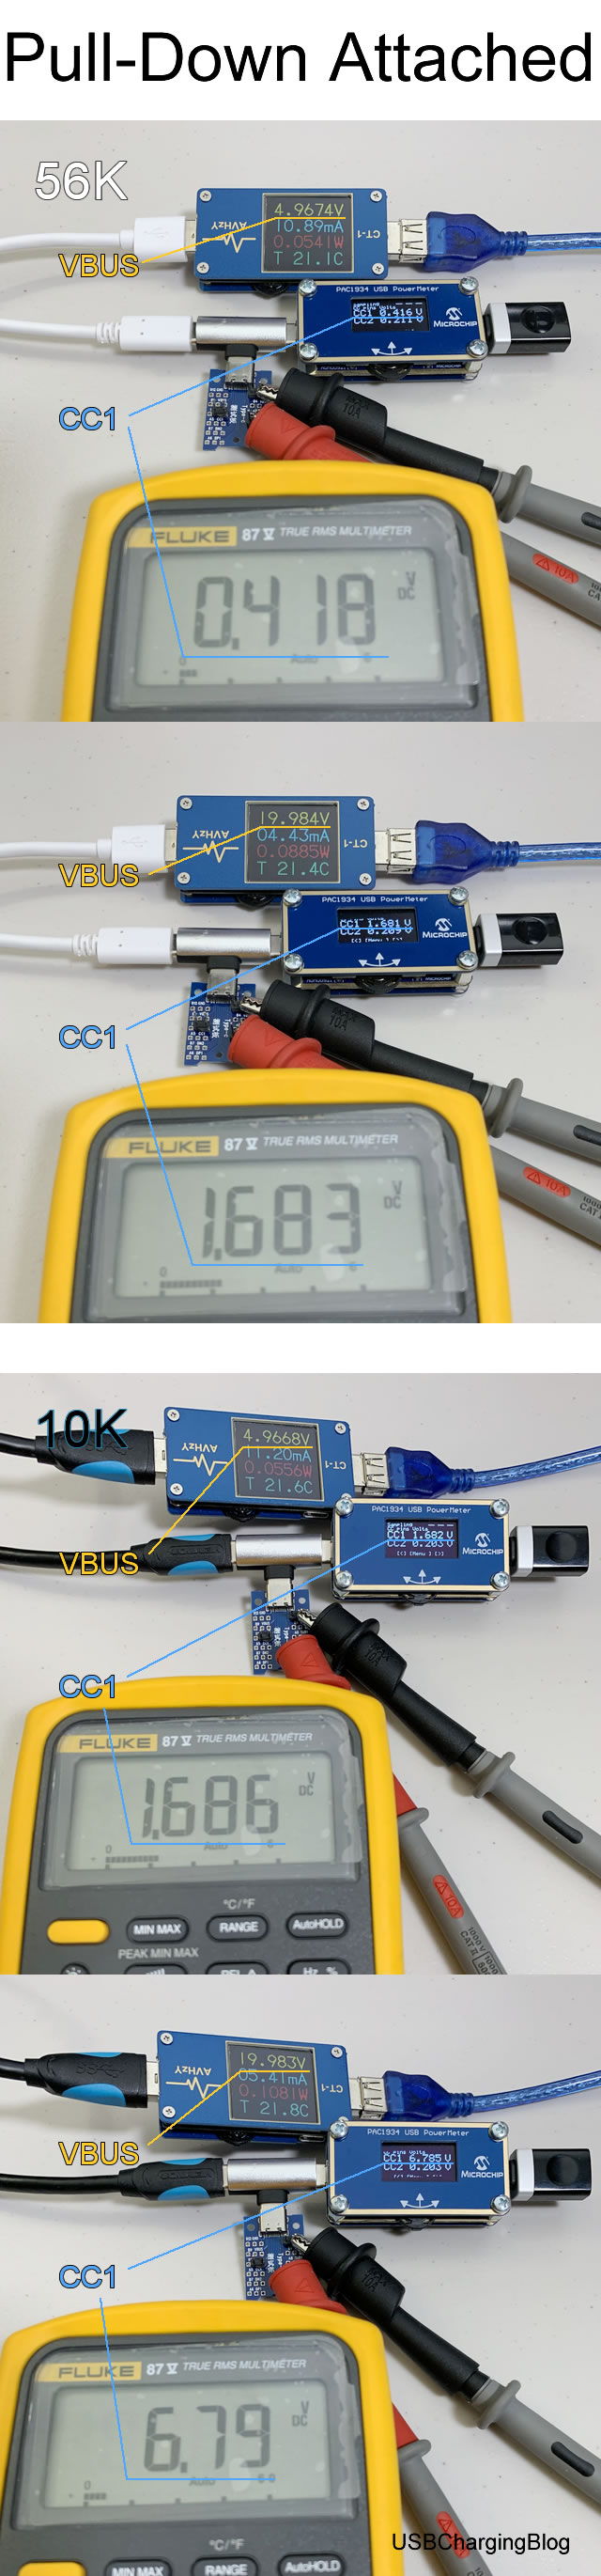 Blow_up_usb_tester-CC1_voltage_pull-down_attached